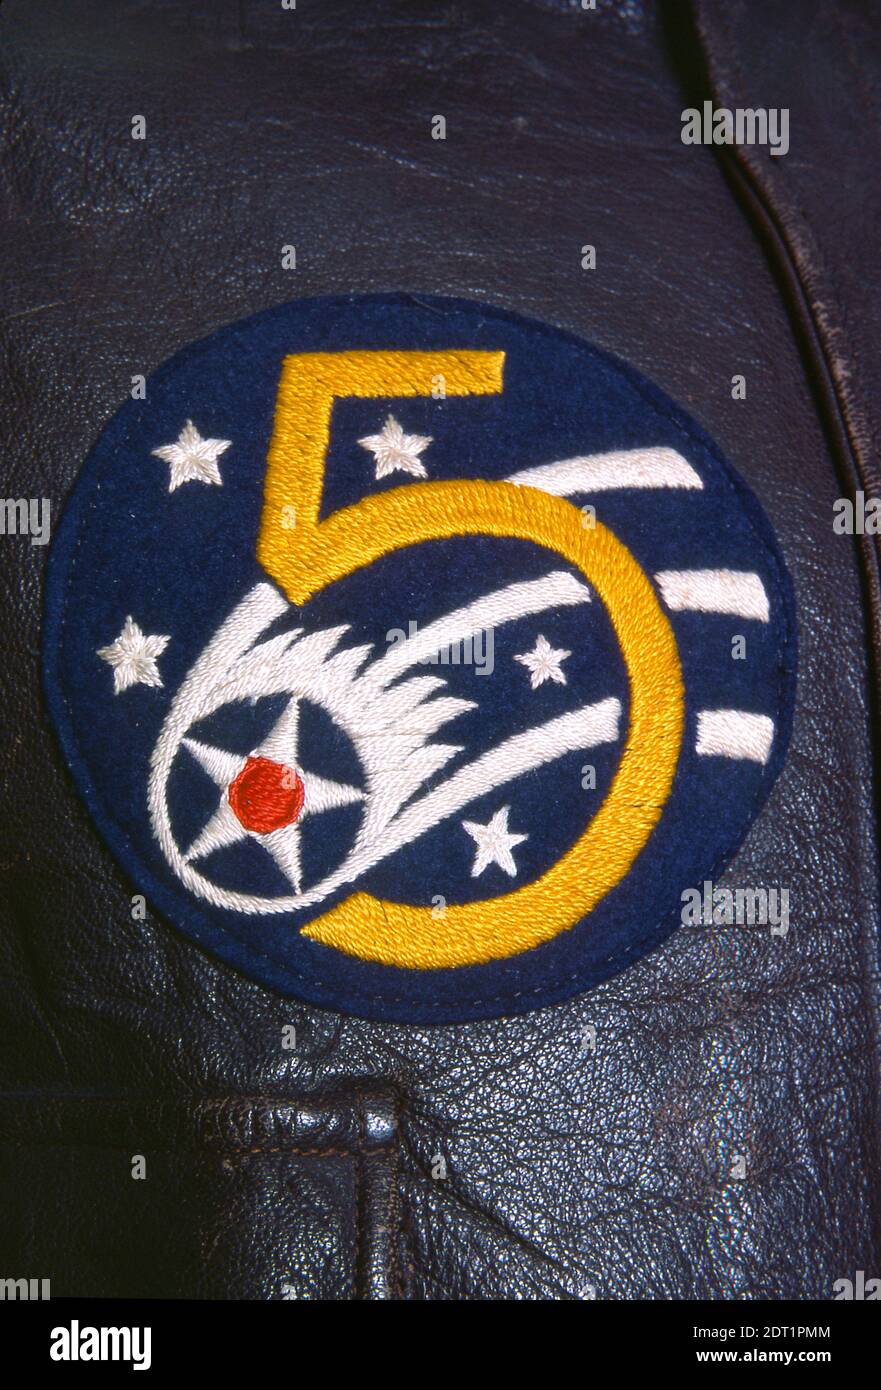 US Army Air Corps 5th Air Force medallion and shoulder patch. Stock Photo